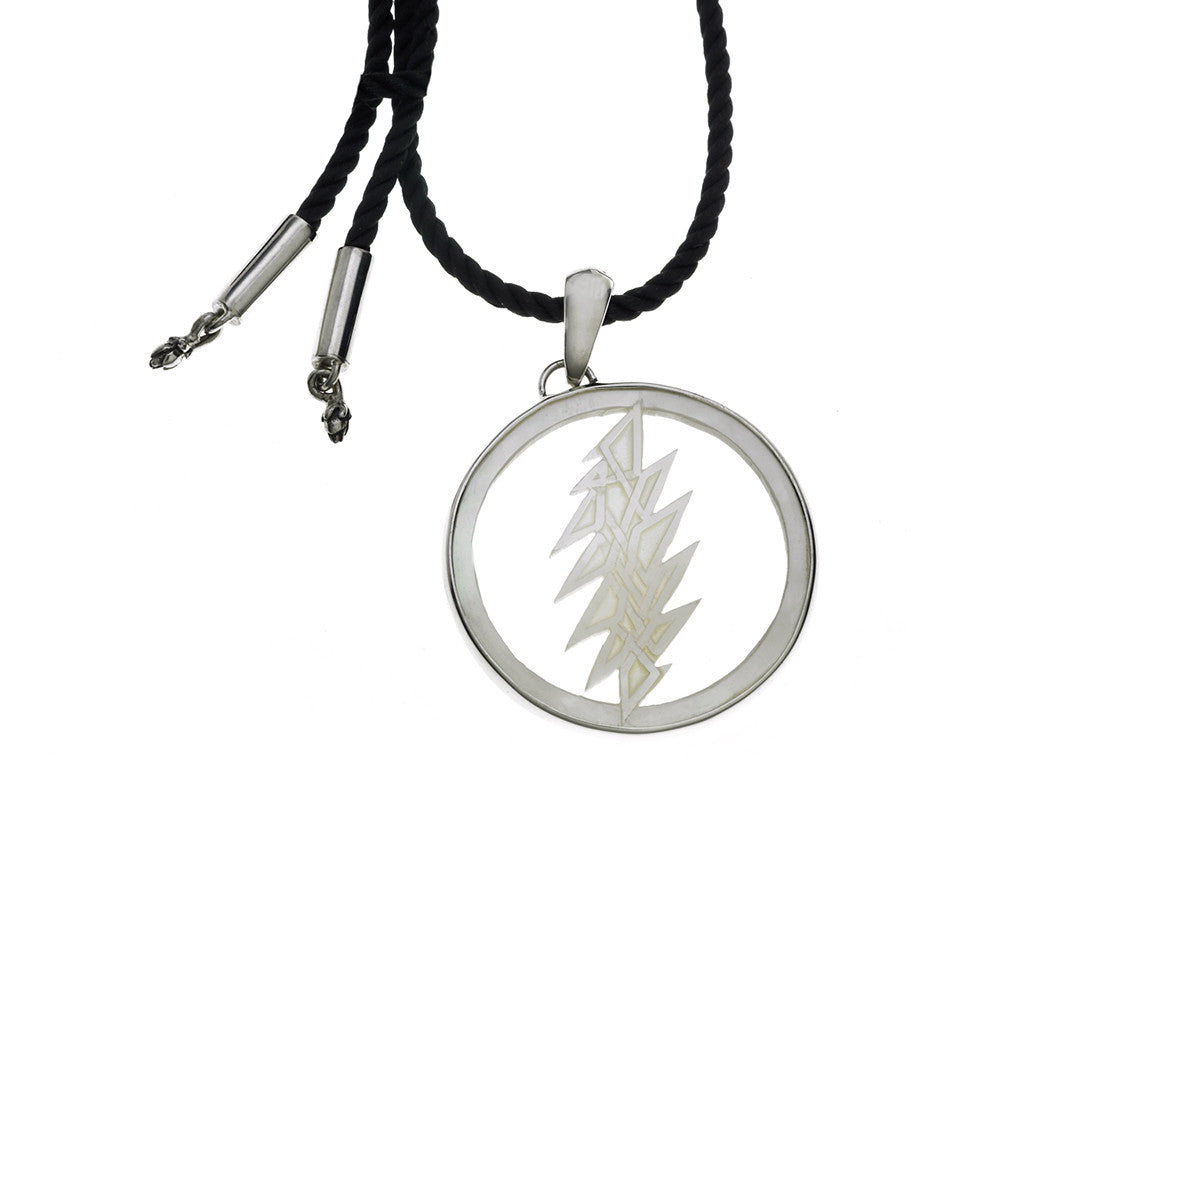 13 Point Lightening Bolt Sterling Silver Mother Of Pearl Cord Necklace - Cynthia Gale New York - 1